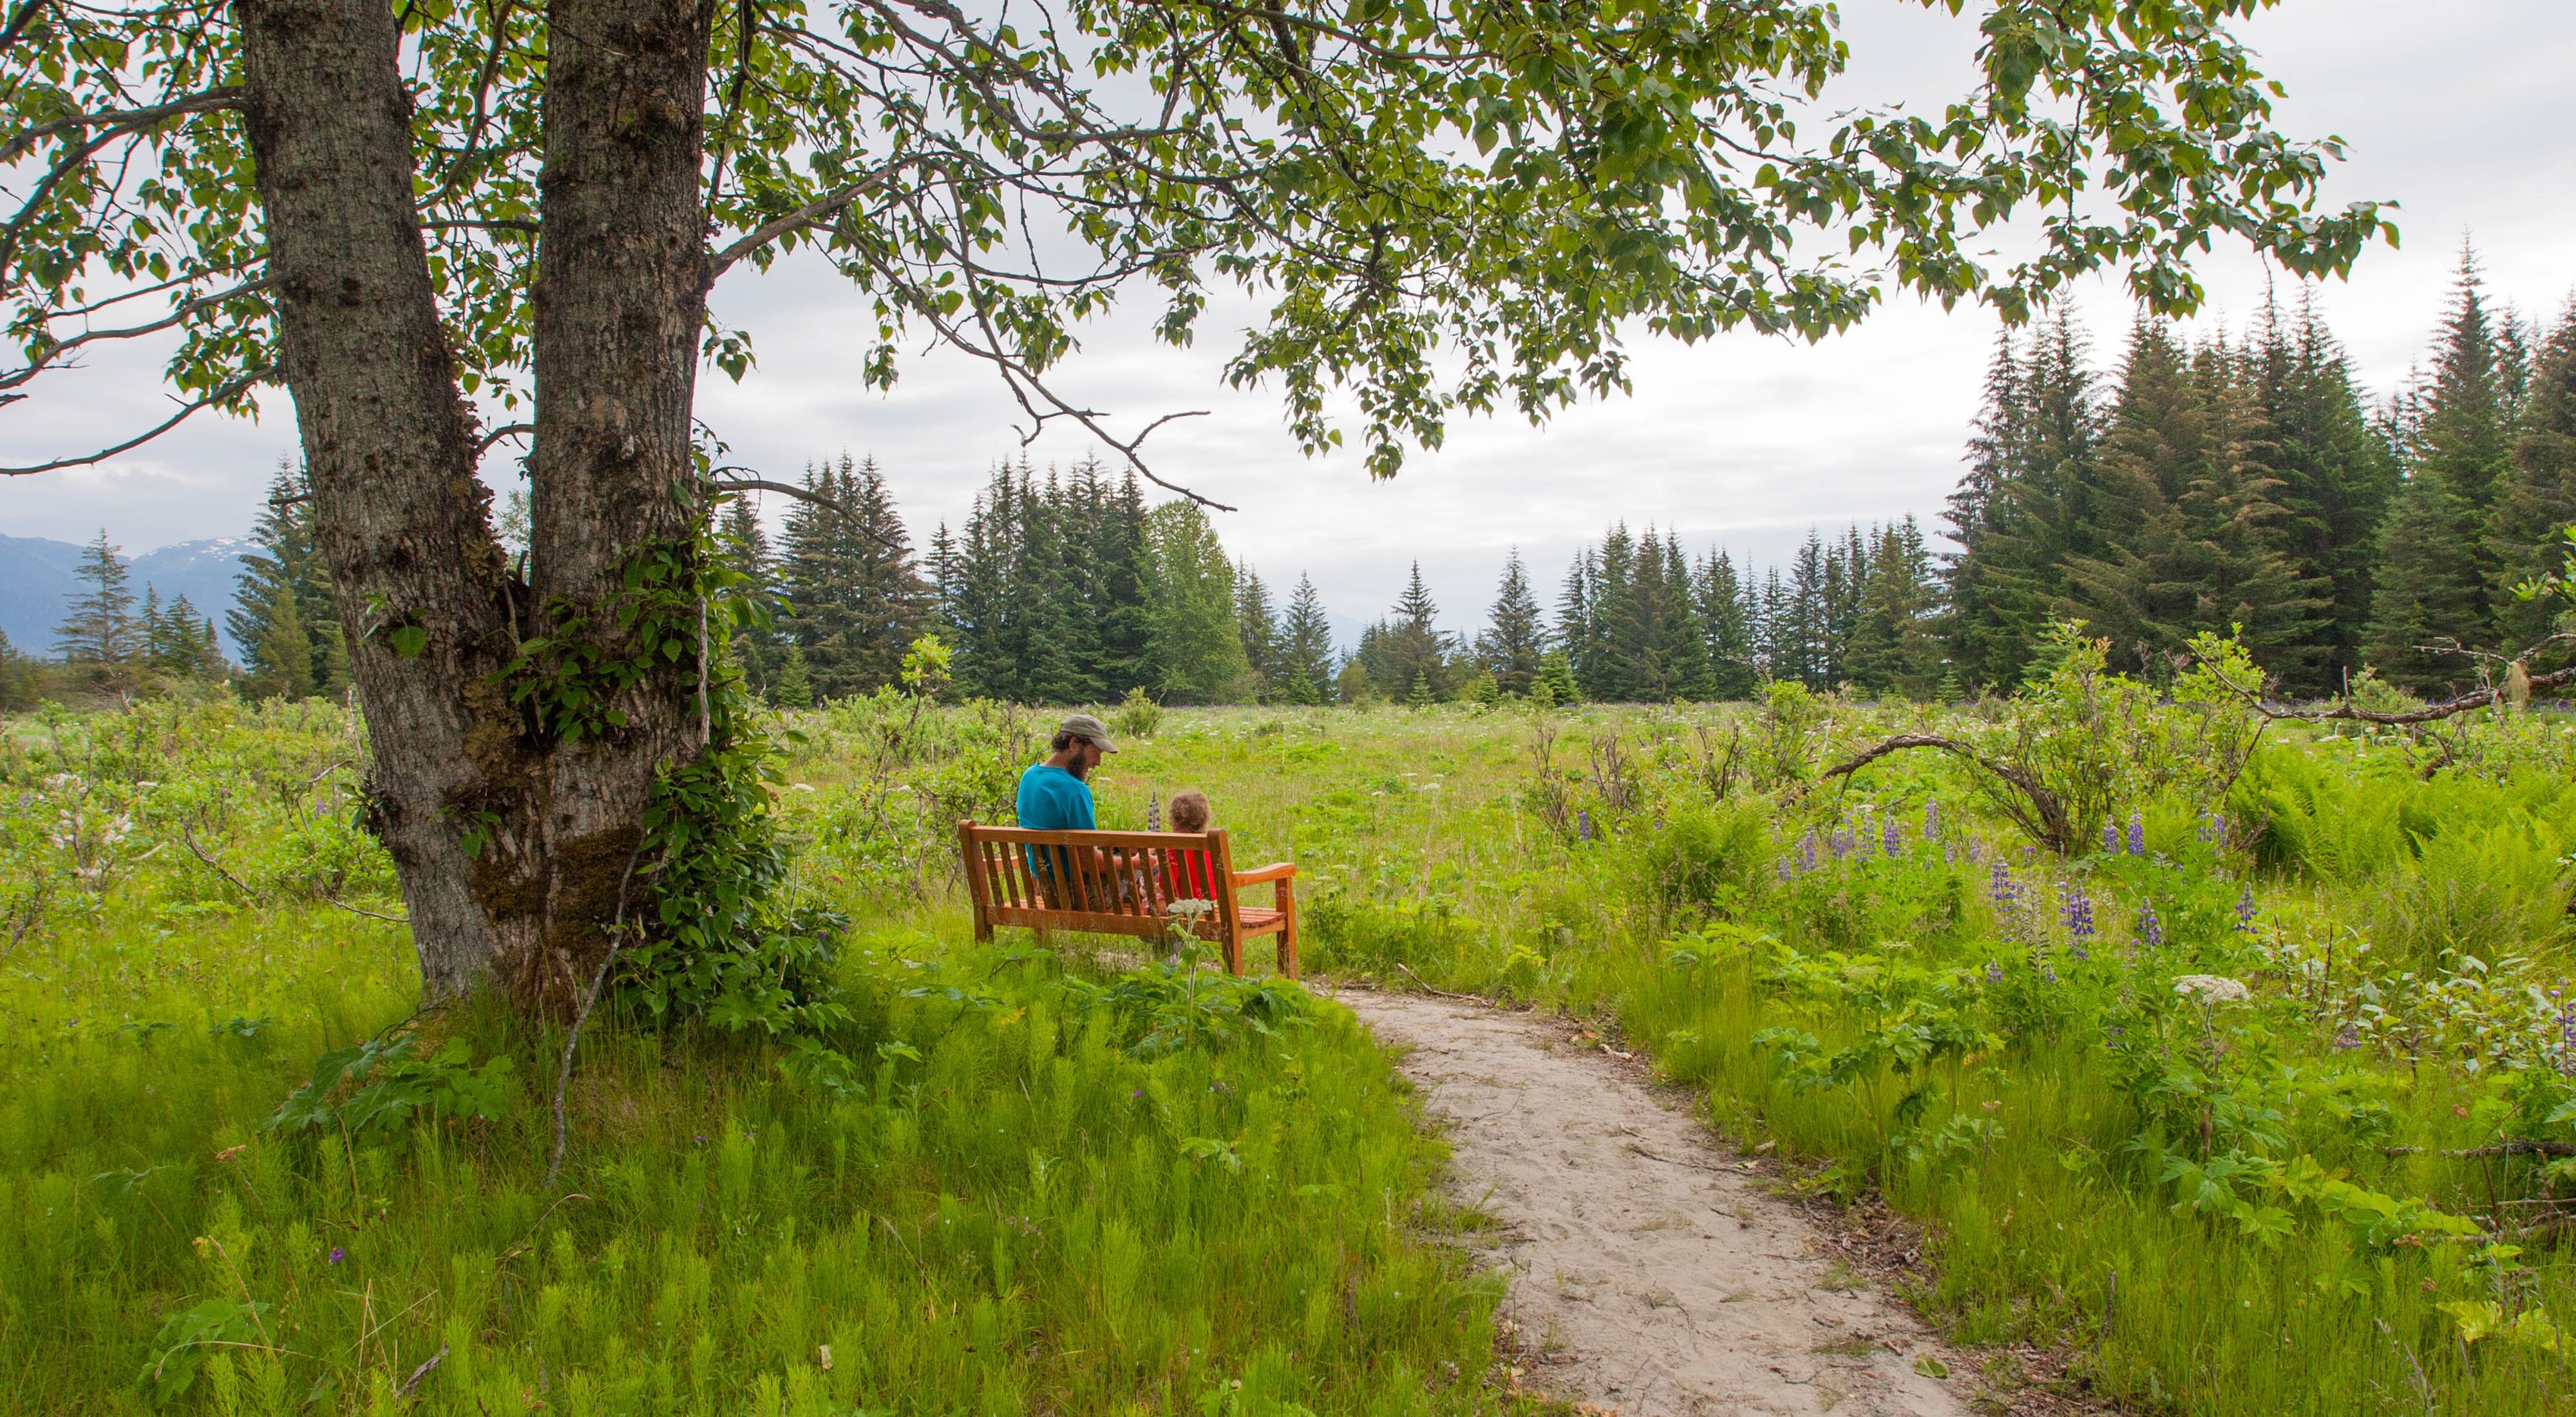 An adult and a child sit on a red bench on a trail in the midst of a large grassy field.